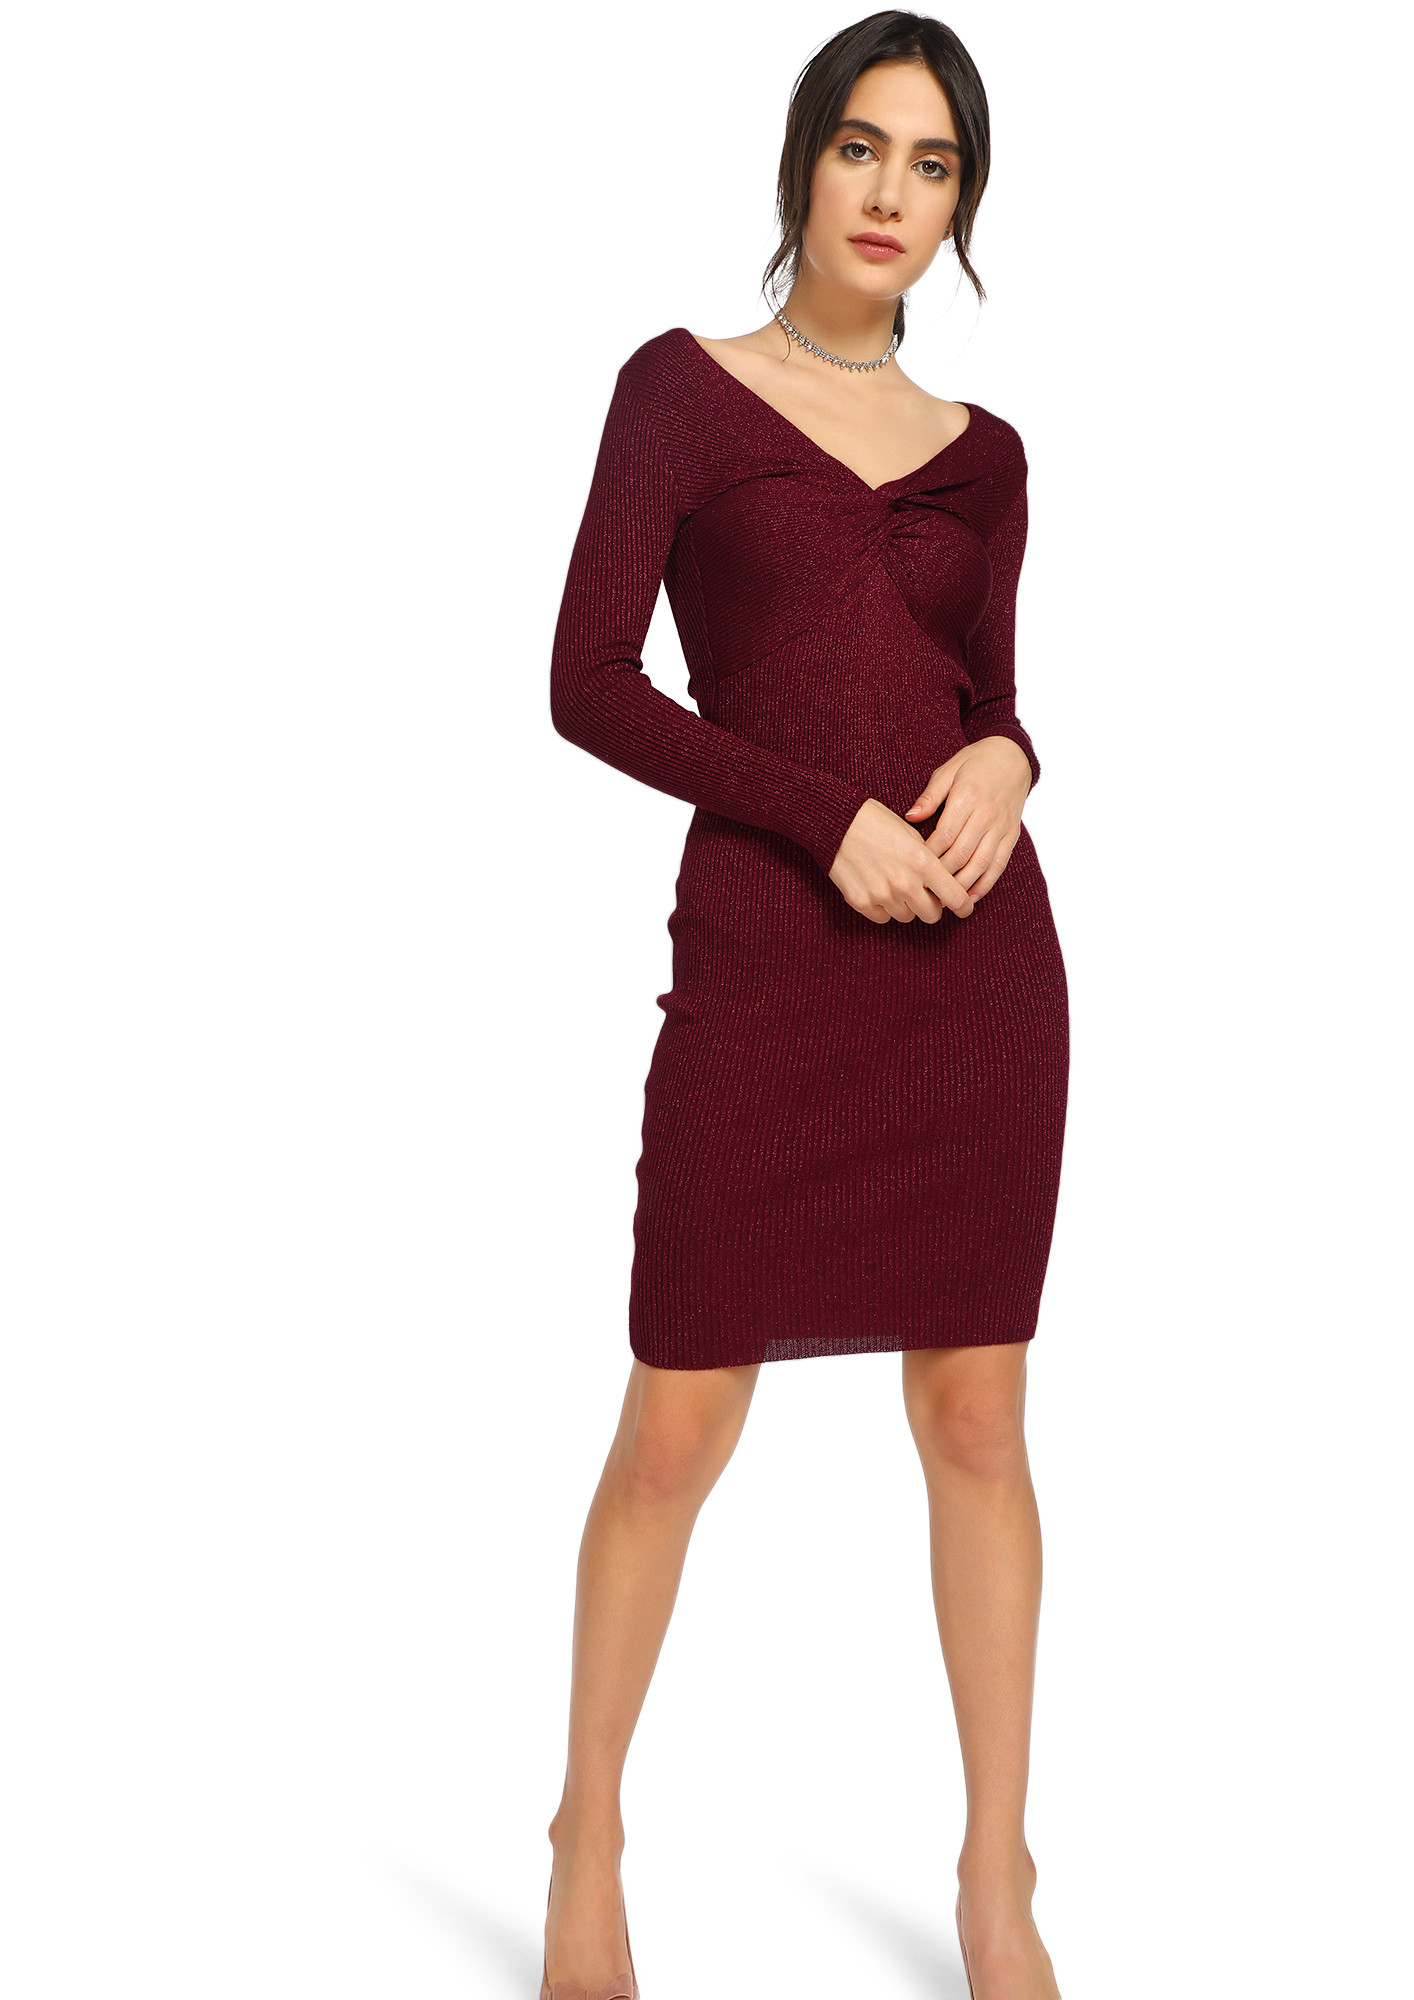 KNITTING SHIMMERS WINE RED PENCIL DRESS